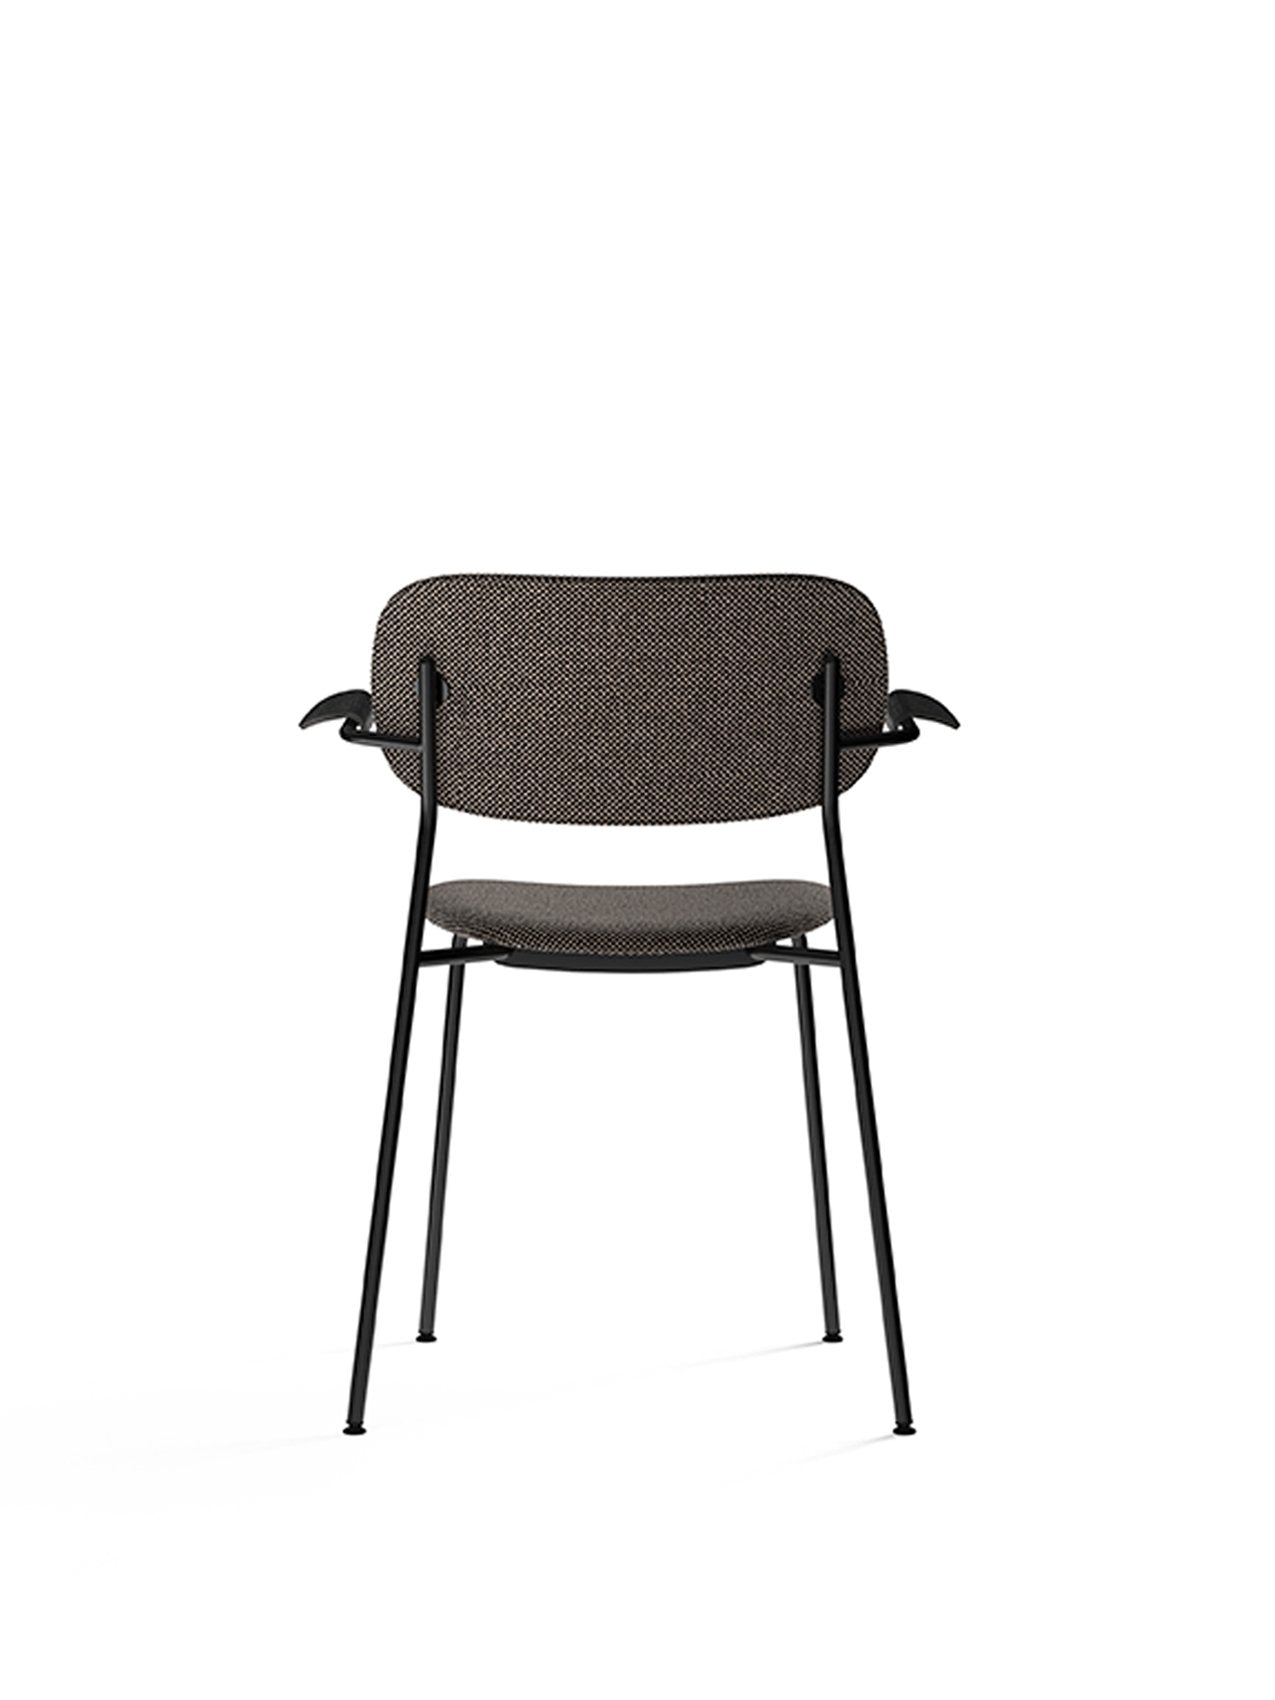 Co Chair, Fully Upholstered-Chair-Norm Architects-Dining Height (Seat 17.7in H)/Chrome without Armrest-0250 Cognac/Dakar-menu-minimalist-modern-danish-design-home-decor